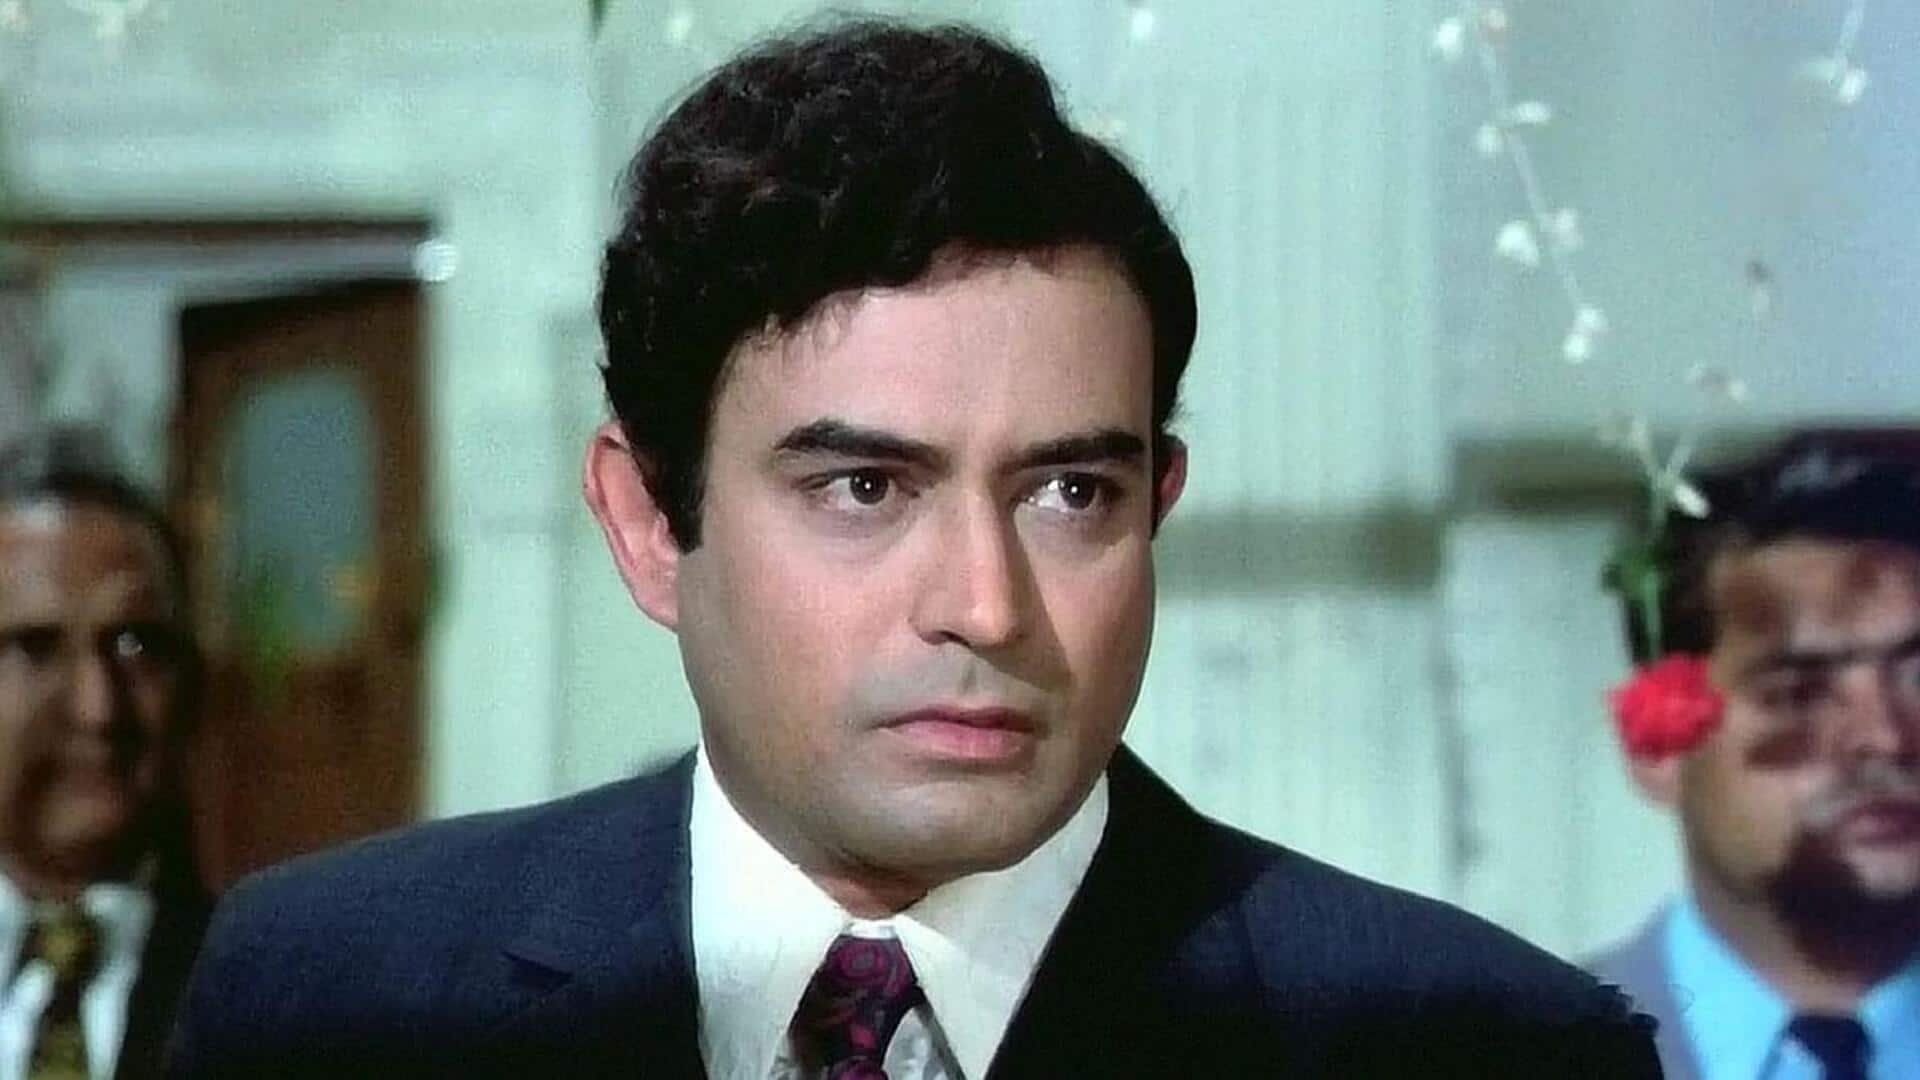 A chilling prediction Sanjeev Kumar made about his own death